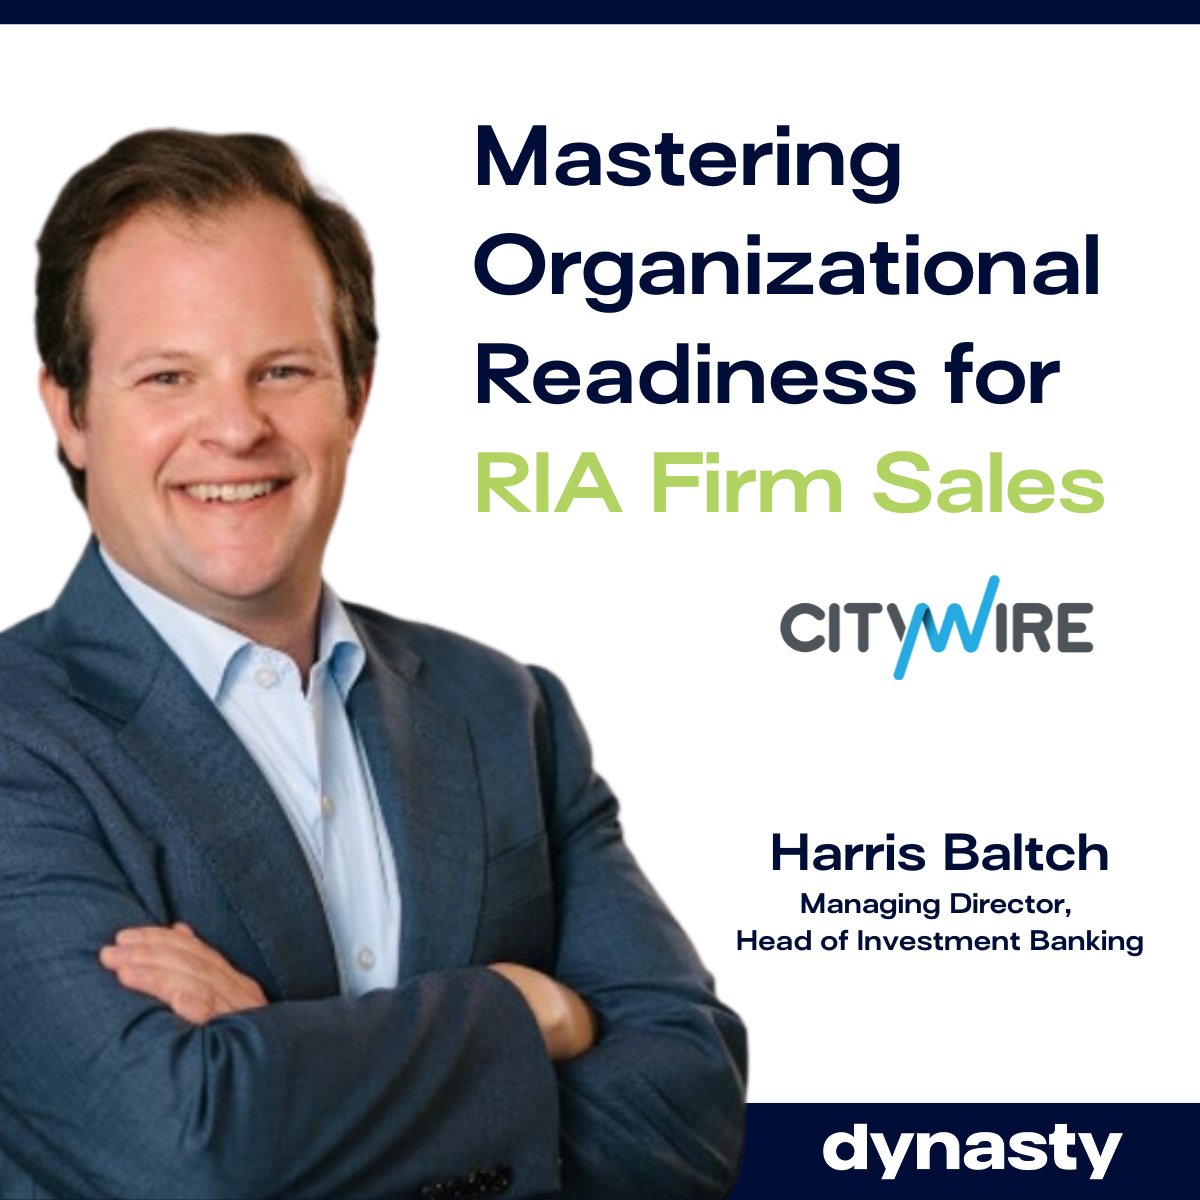 Considering selling your RIA firm in the future? In this @Citywire article, discover key takeaways shared in a recent @Fidelity webinar featuring Harris Baltch, Dynasty Head of Investment Banking. Read More: bit.ly/3wrjk2s